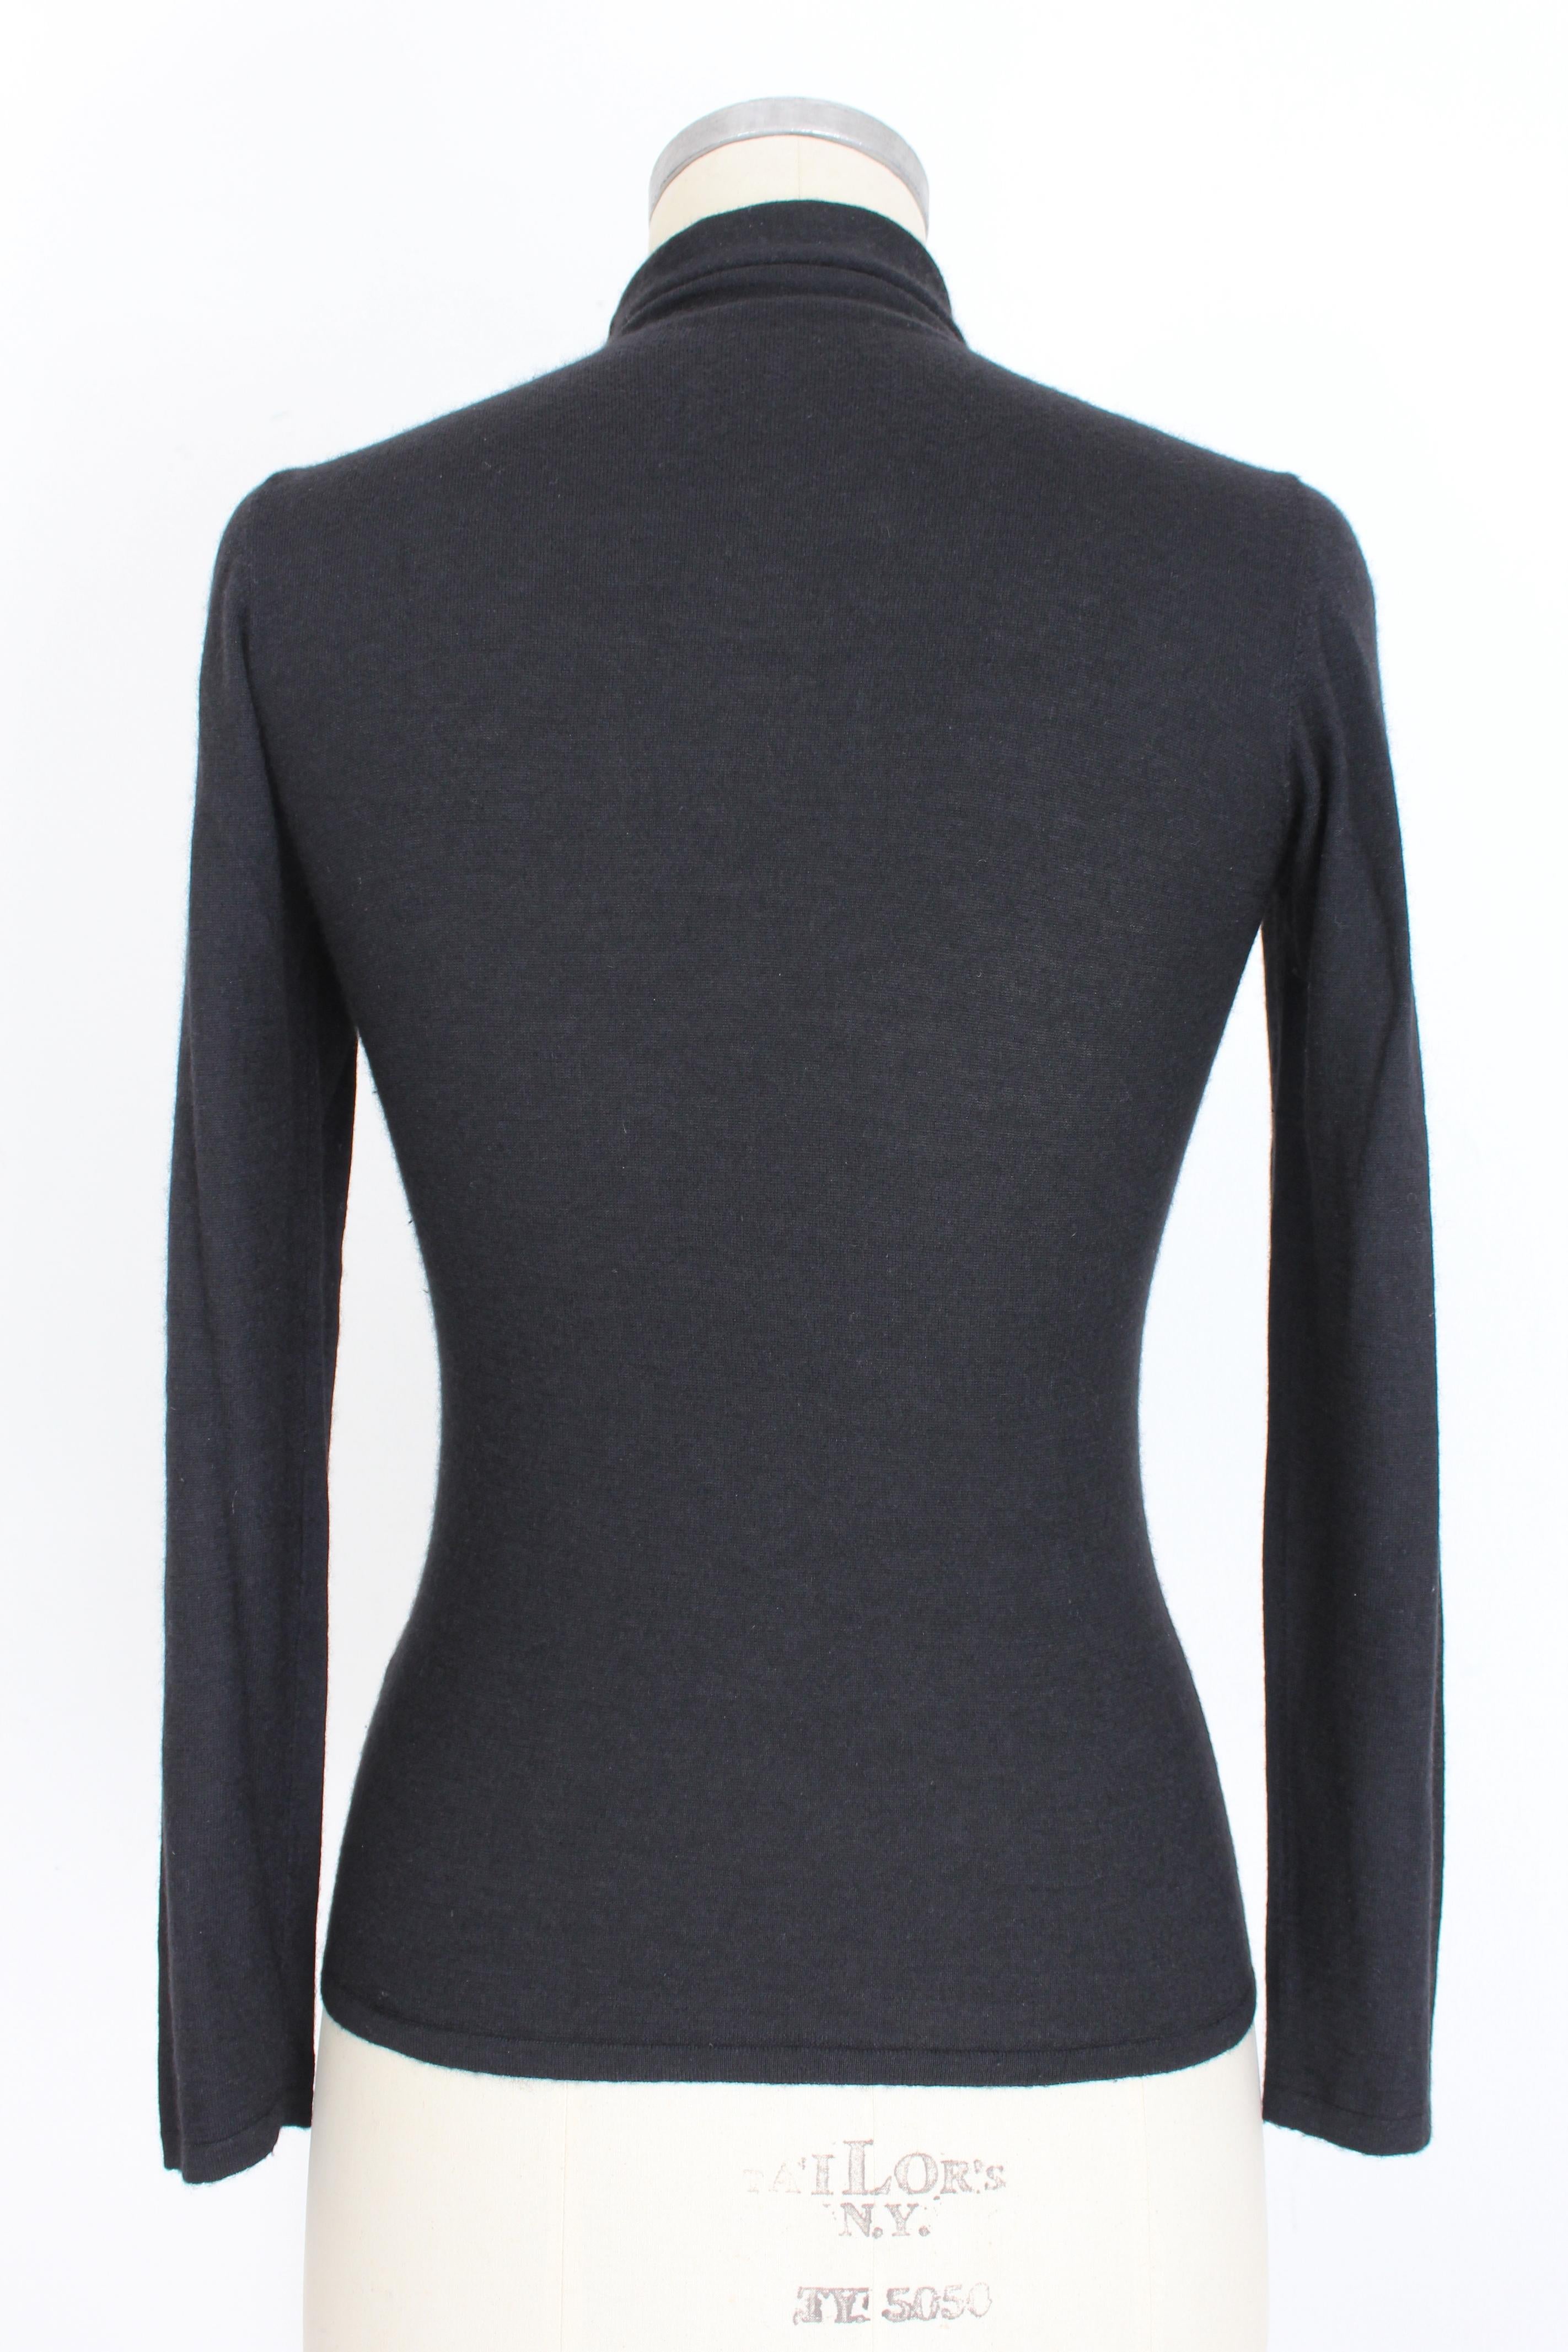 Sweater in silk and cashmere by the designer Brunello Cucinelli, color black. Made with the best Italian manufacture in soft cashmere and silk. Comfortable turtle neck. The very soft fabric is 70% cashmere and 30% silk. Made in Italy, size small.